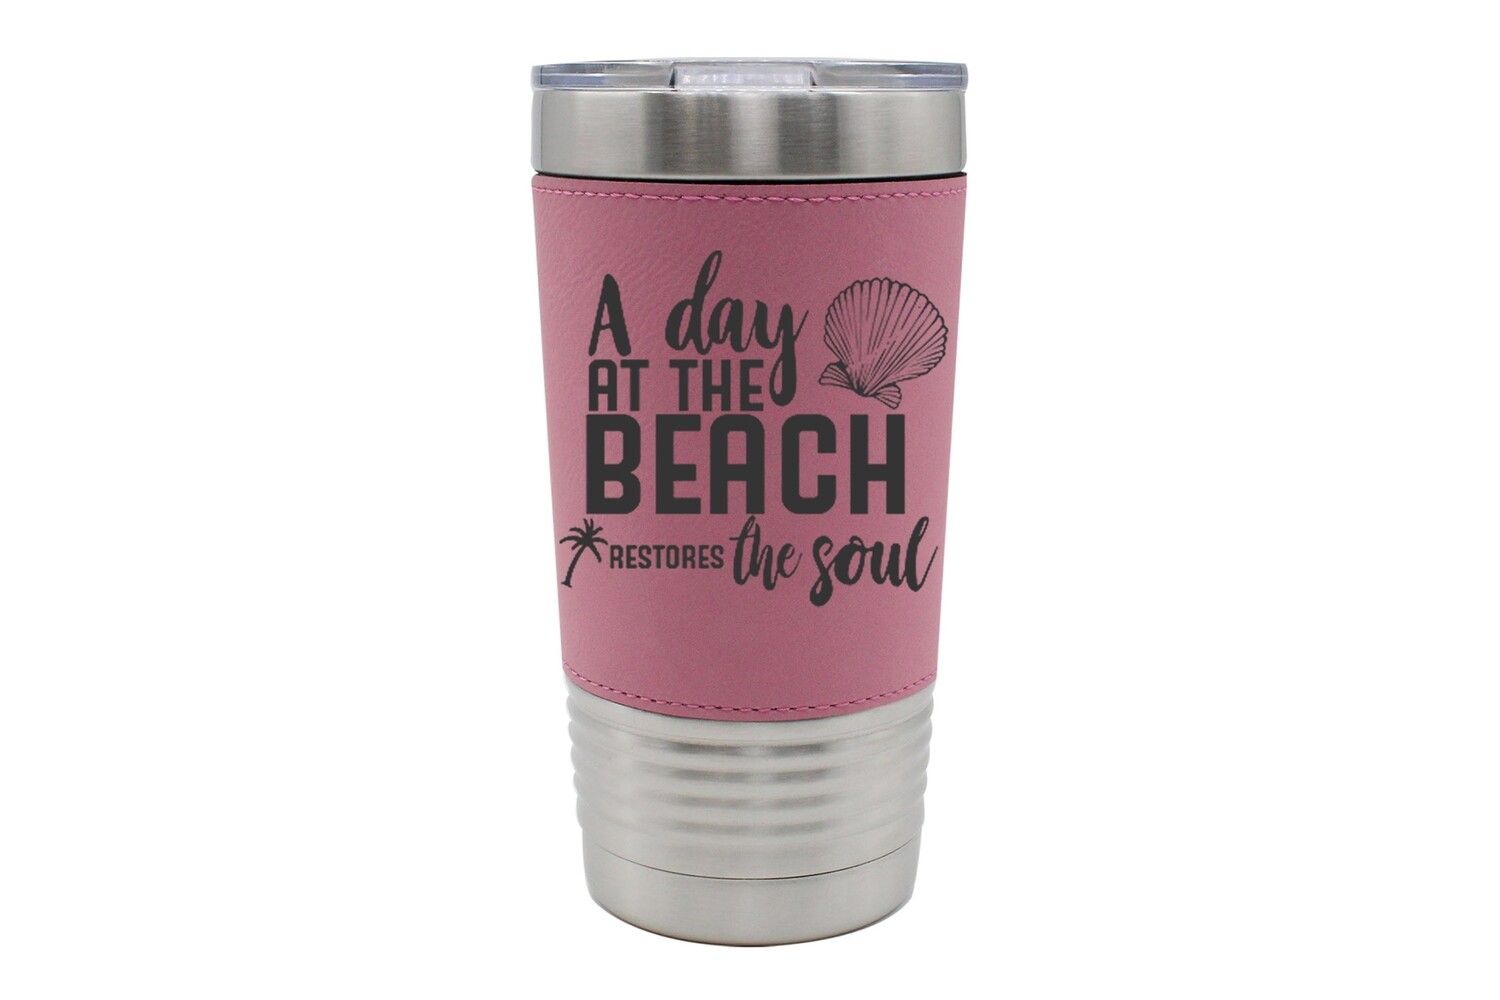 Leatherette 20 oz "A day at the Beach Restores the Soul" Insulated Tumbler